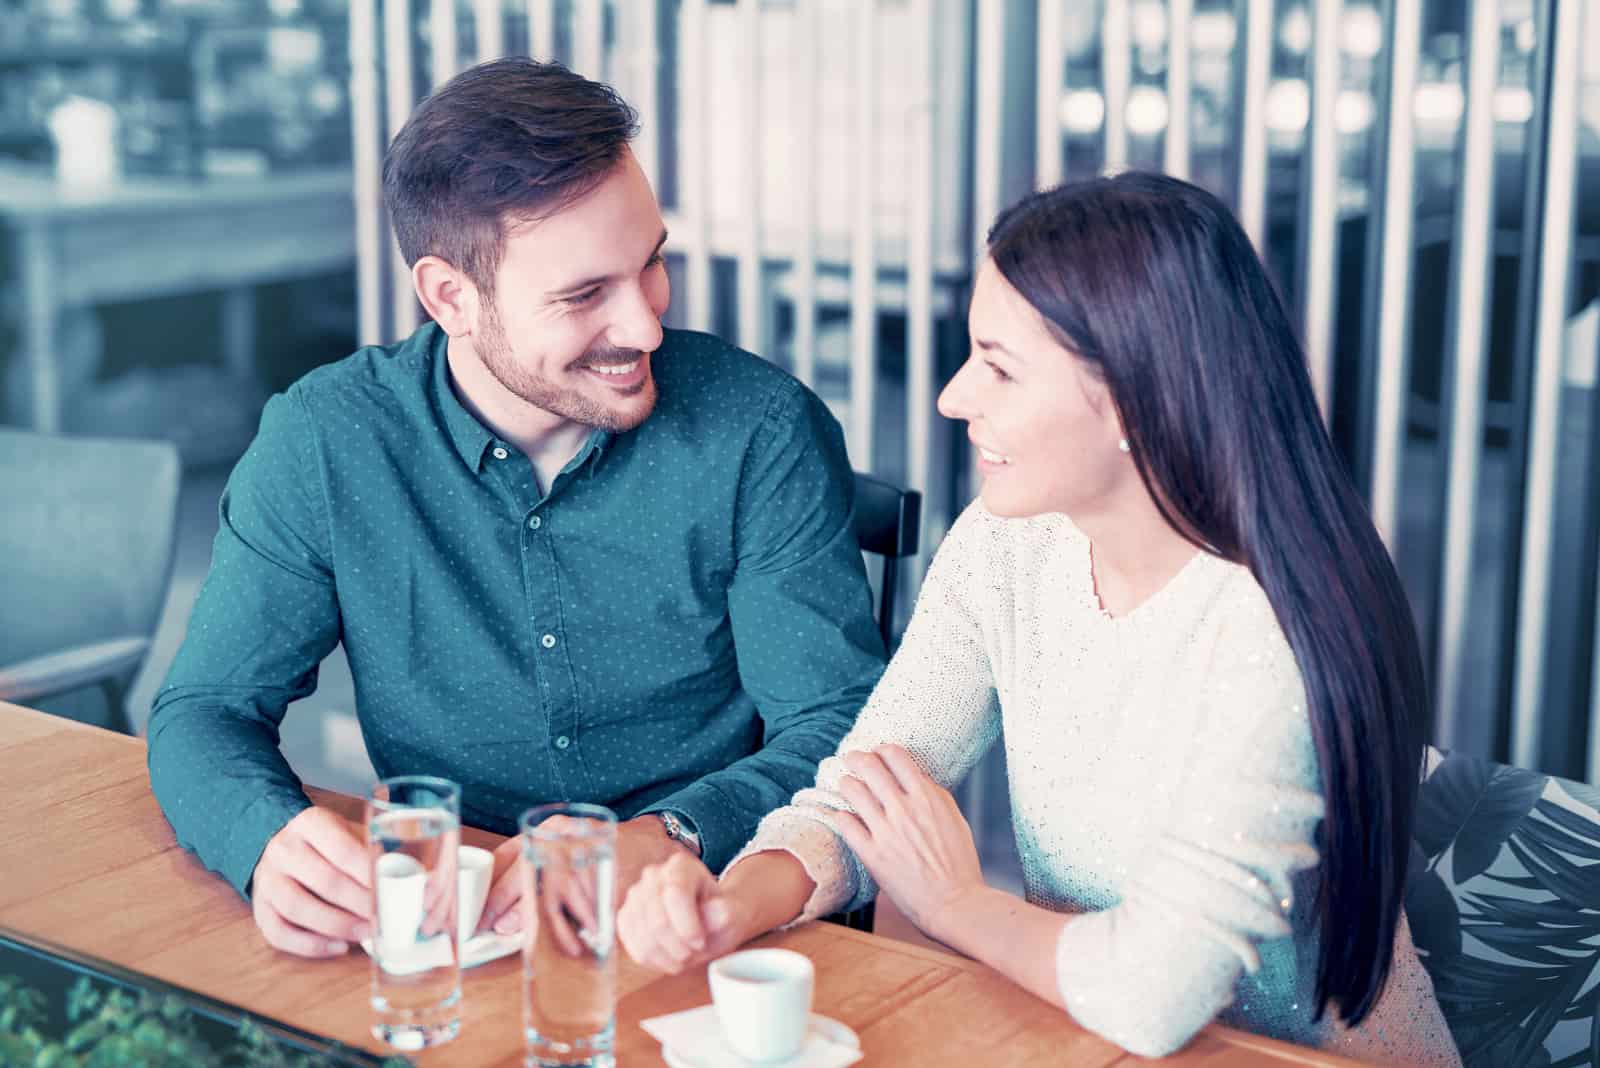 a smiling man and woman sit next to each other and talk